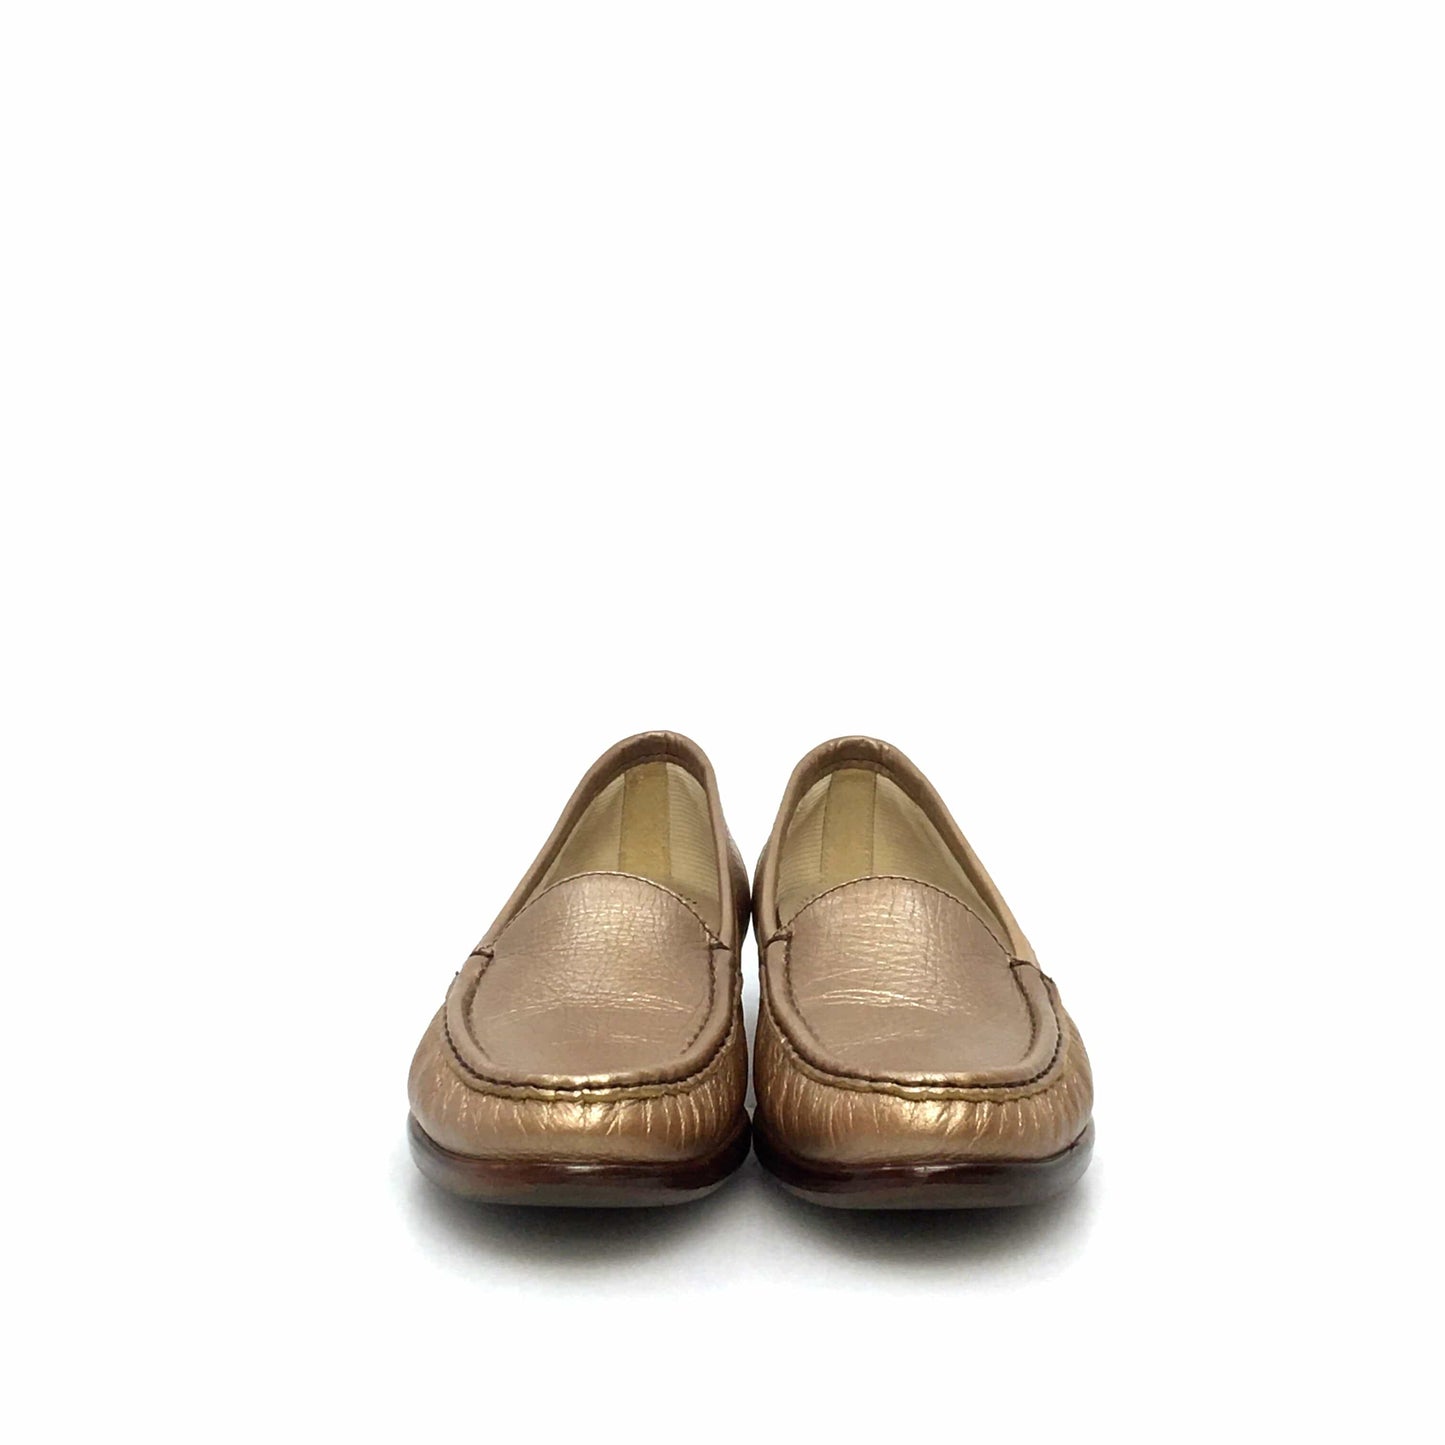 SAS Womens Size 8.5S Leather Loafers Gold Shoes Tripad Comfort Walking